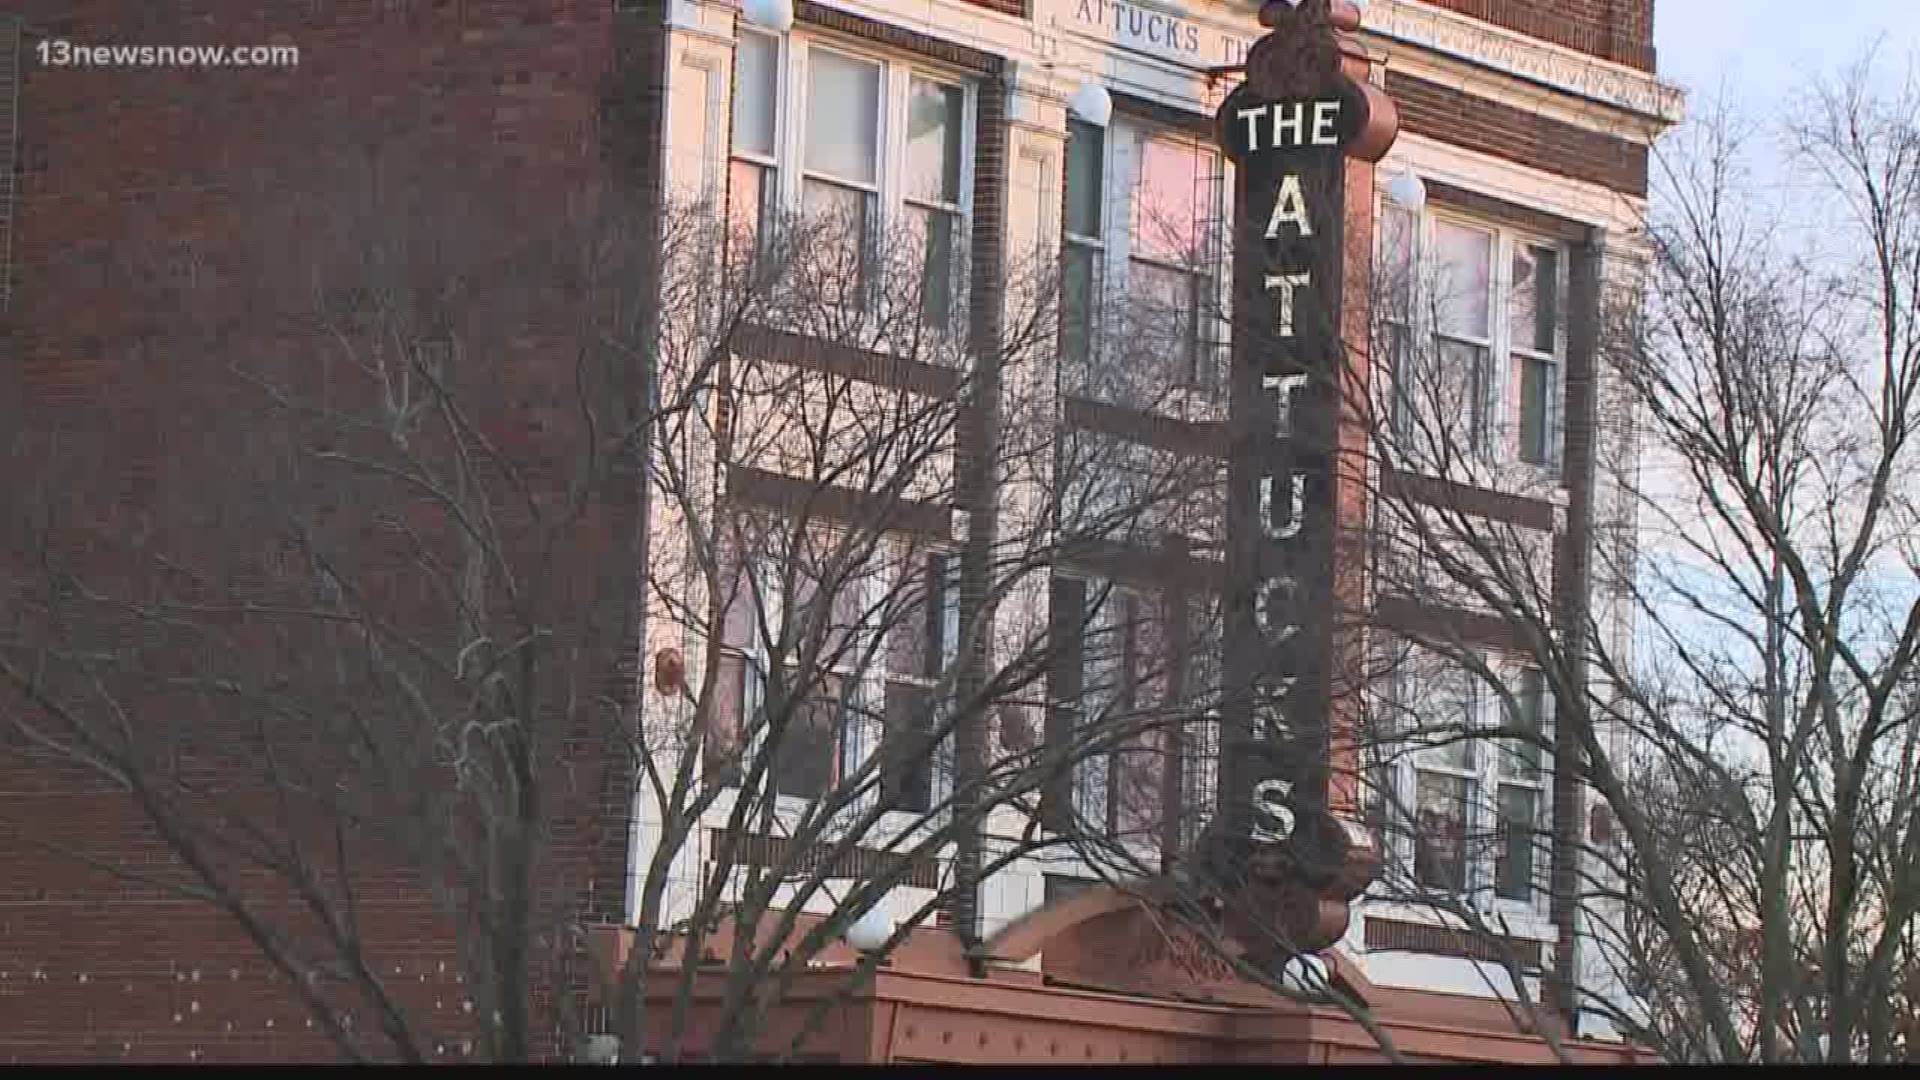 The Attucks Theatre in Norfolk is celebrating its 100-year-anniversary since it opened in 1919.